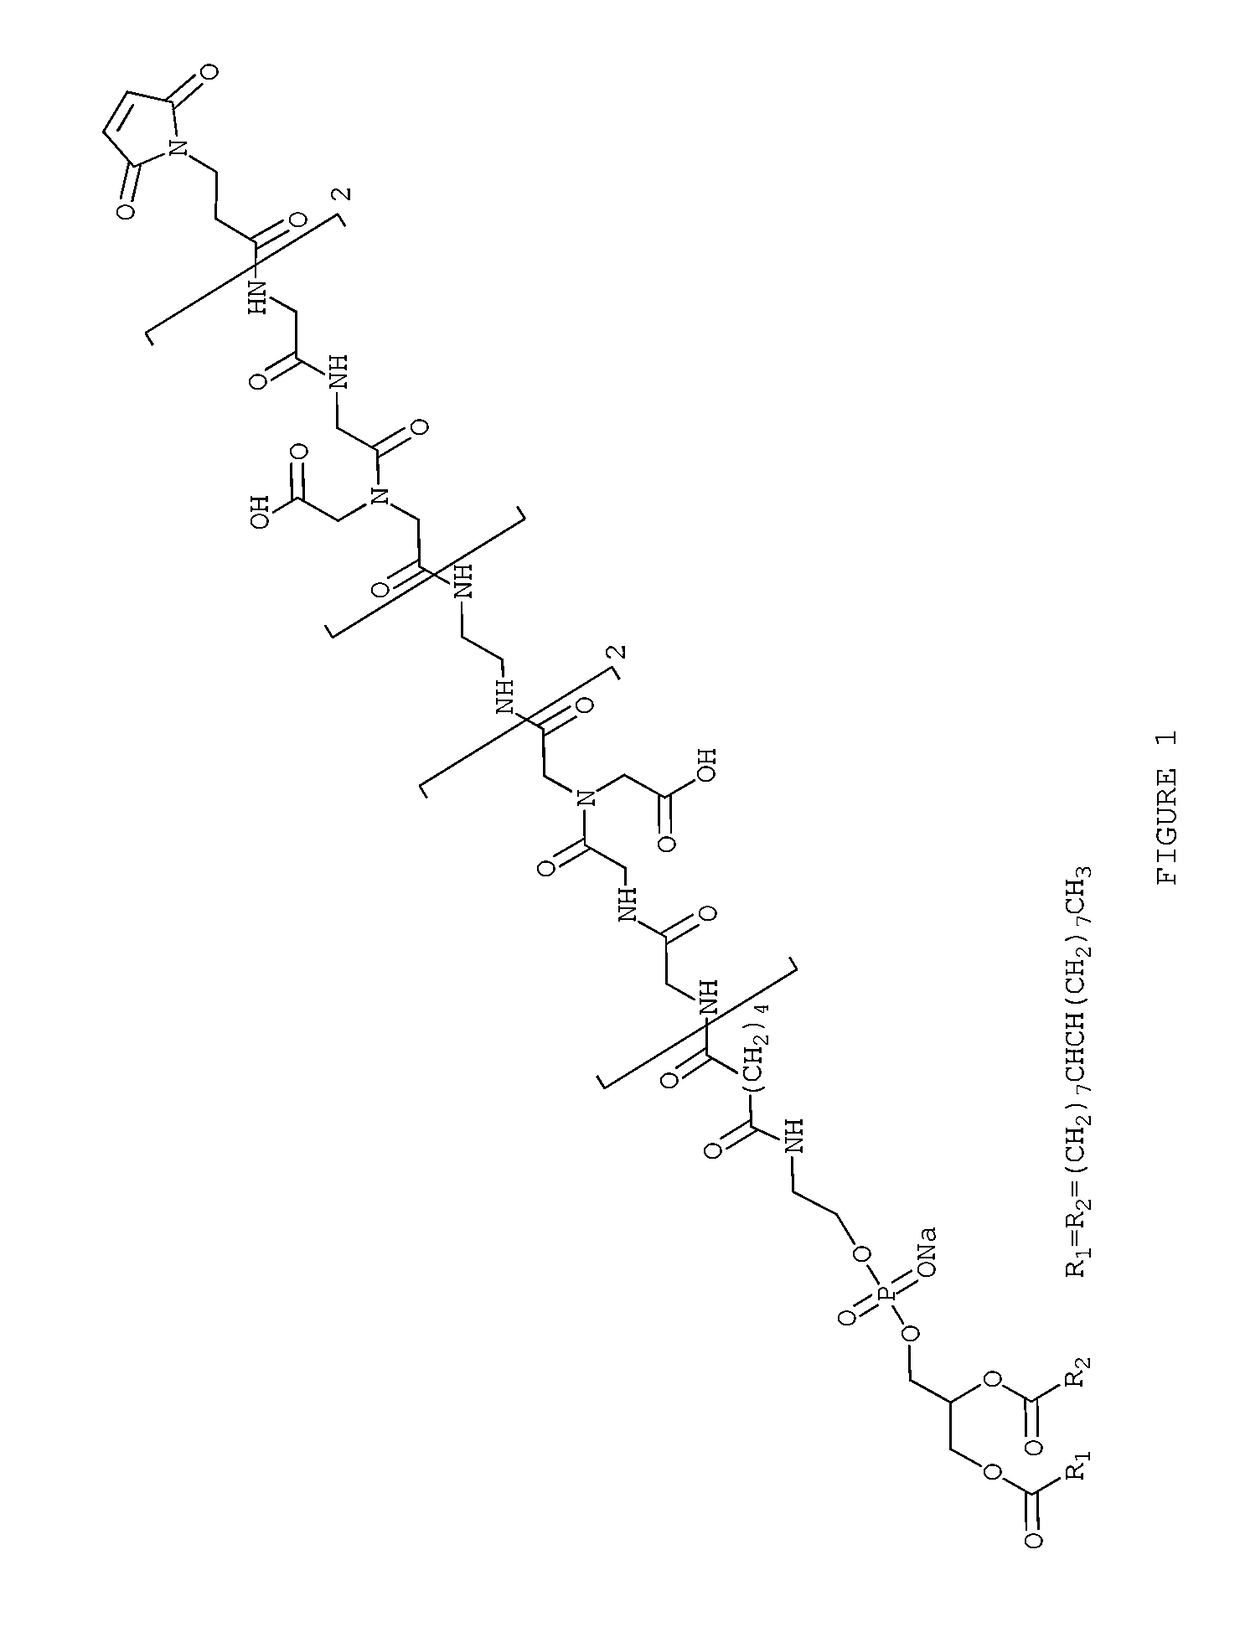 Facile laboratory method for localising biomolecules to the surface of cells and viruses